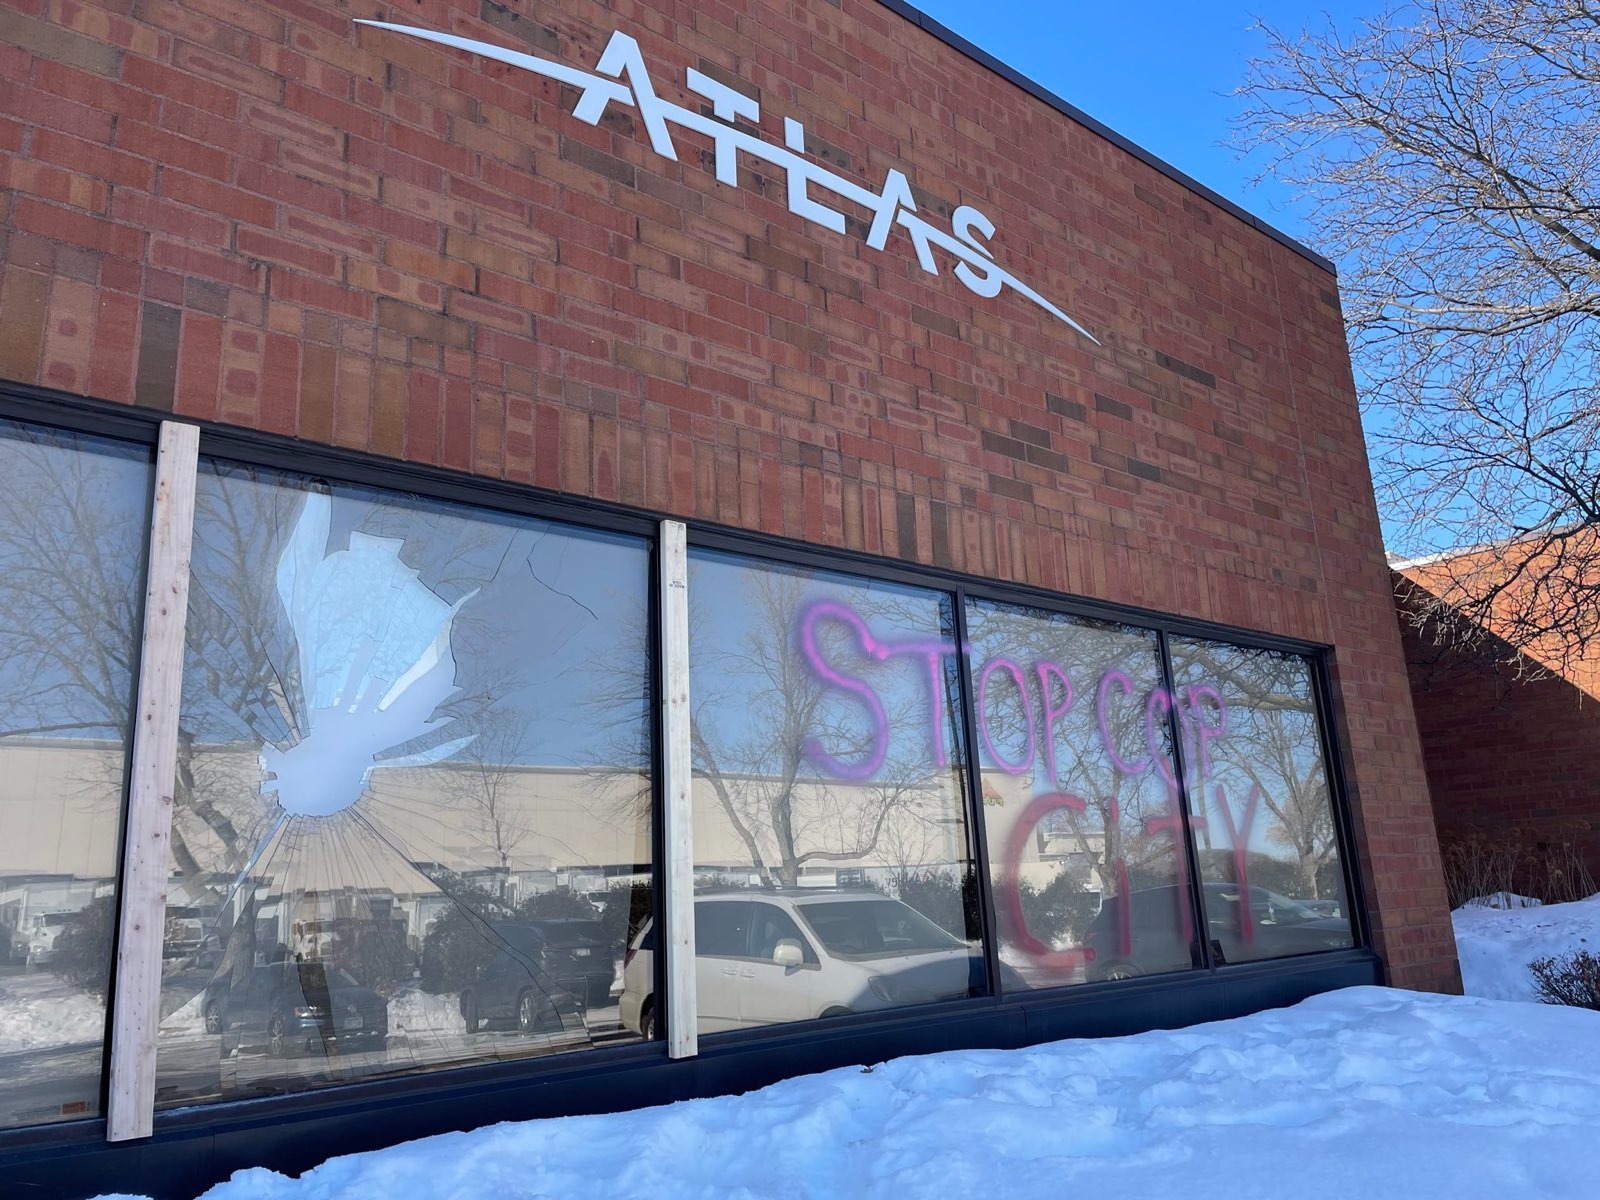 Under a brick wall with an Atlas logo, A glass window is broken. Three other glass windows are tagged "STOP COP CITY" in red spray paint.